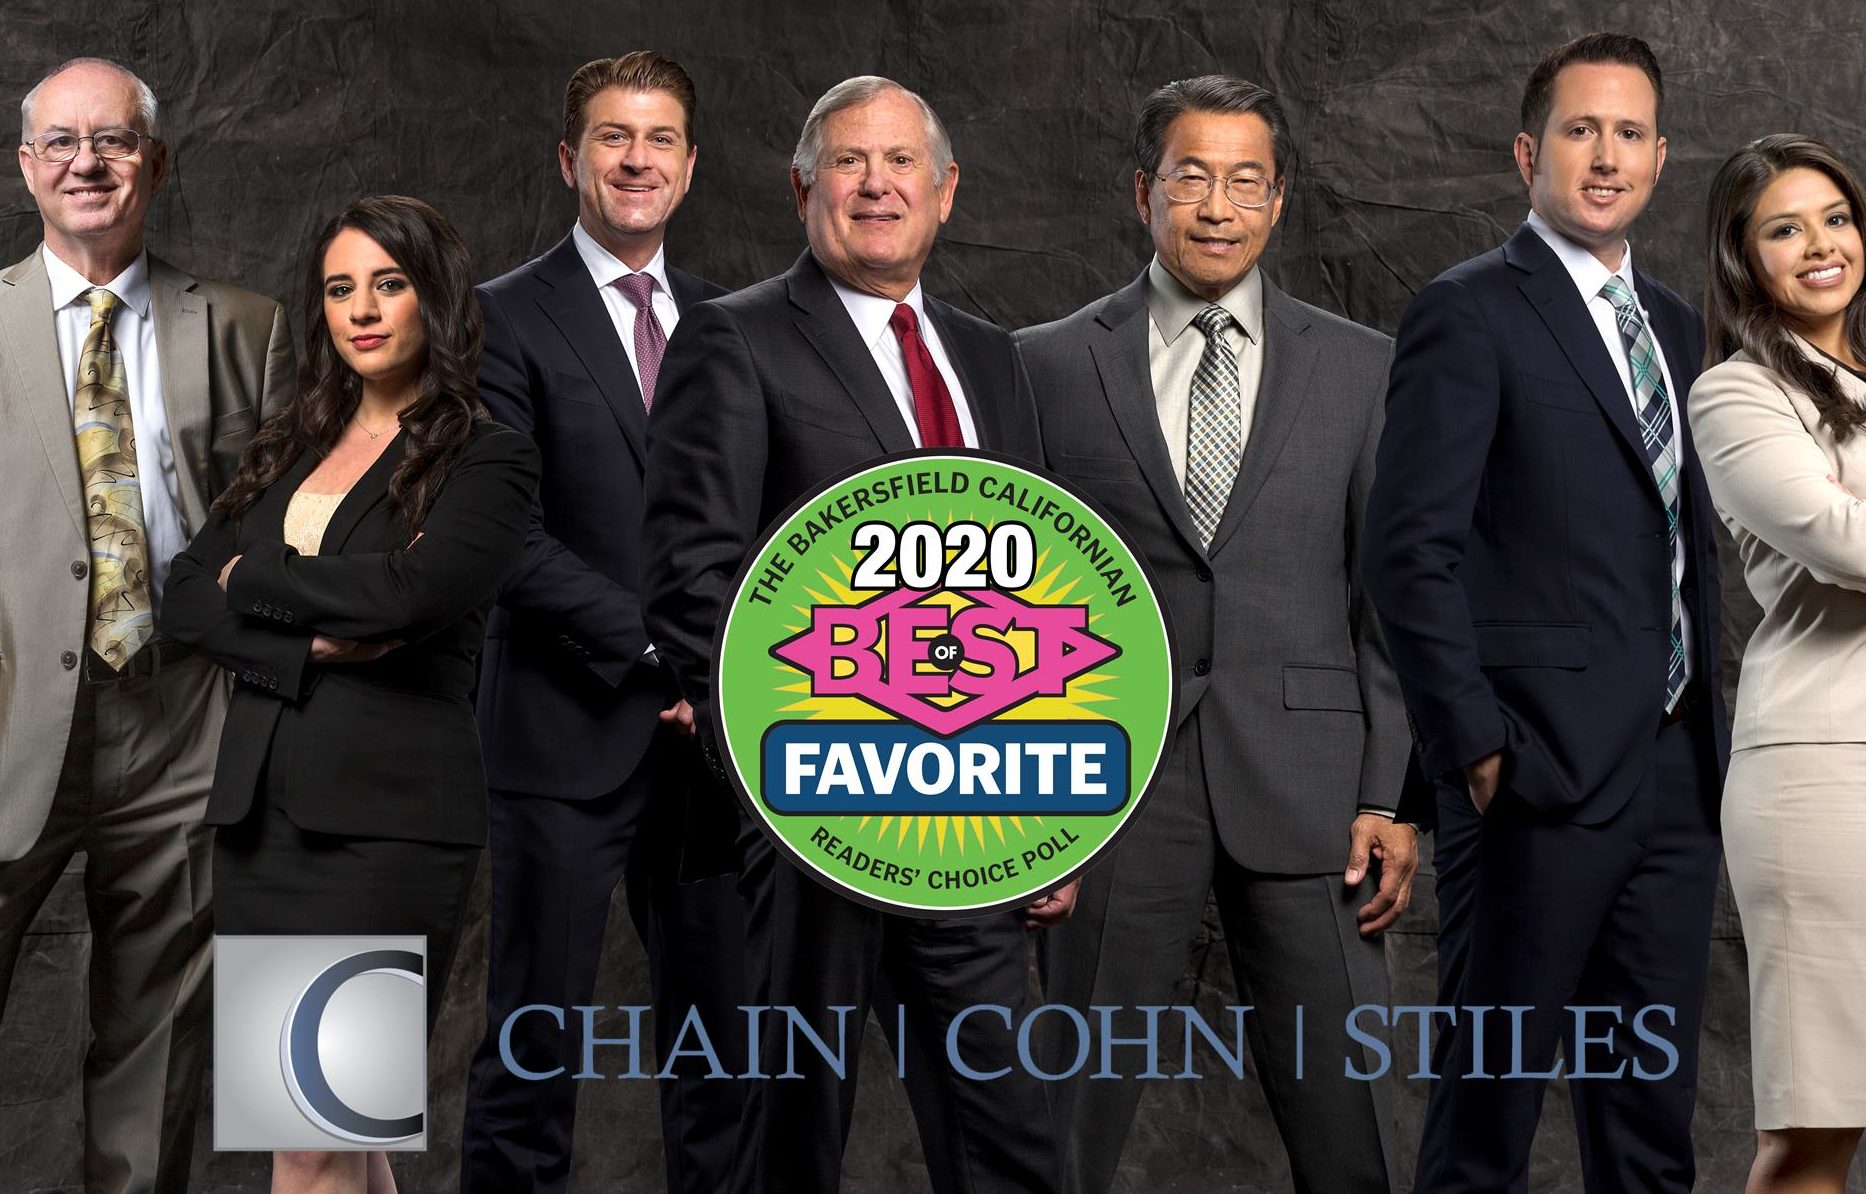 Chain | Cohn | Clark selected into ‘Best Law Firm’ category in 2020 Best of Kern County poll